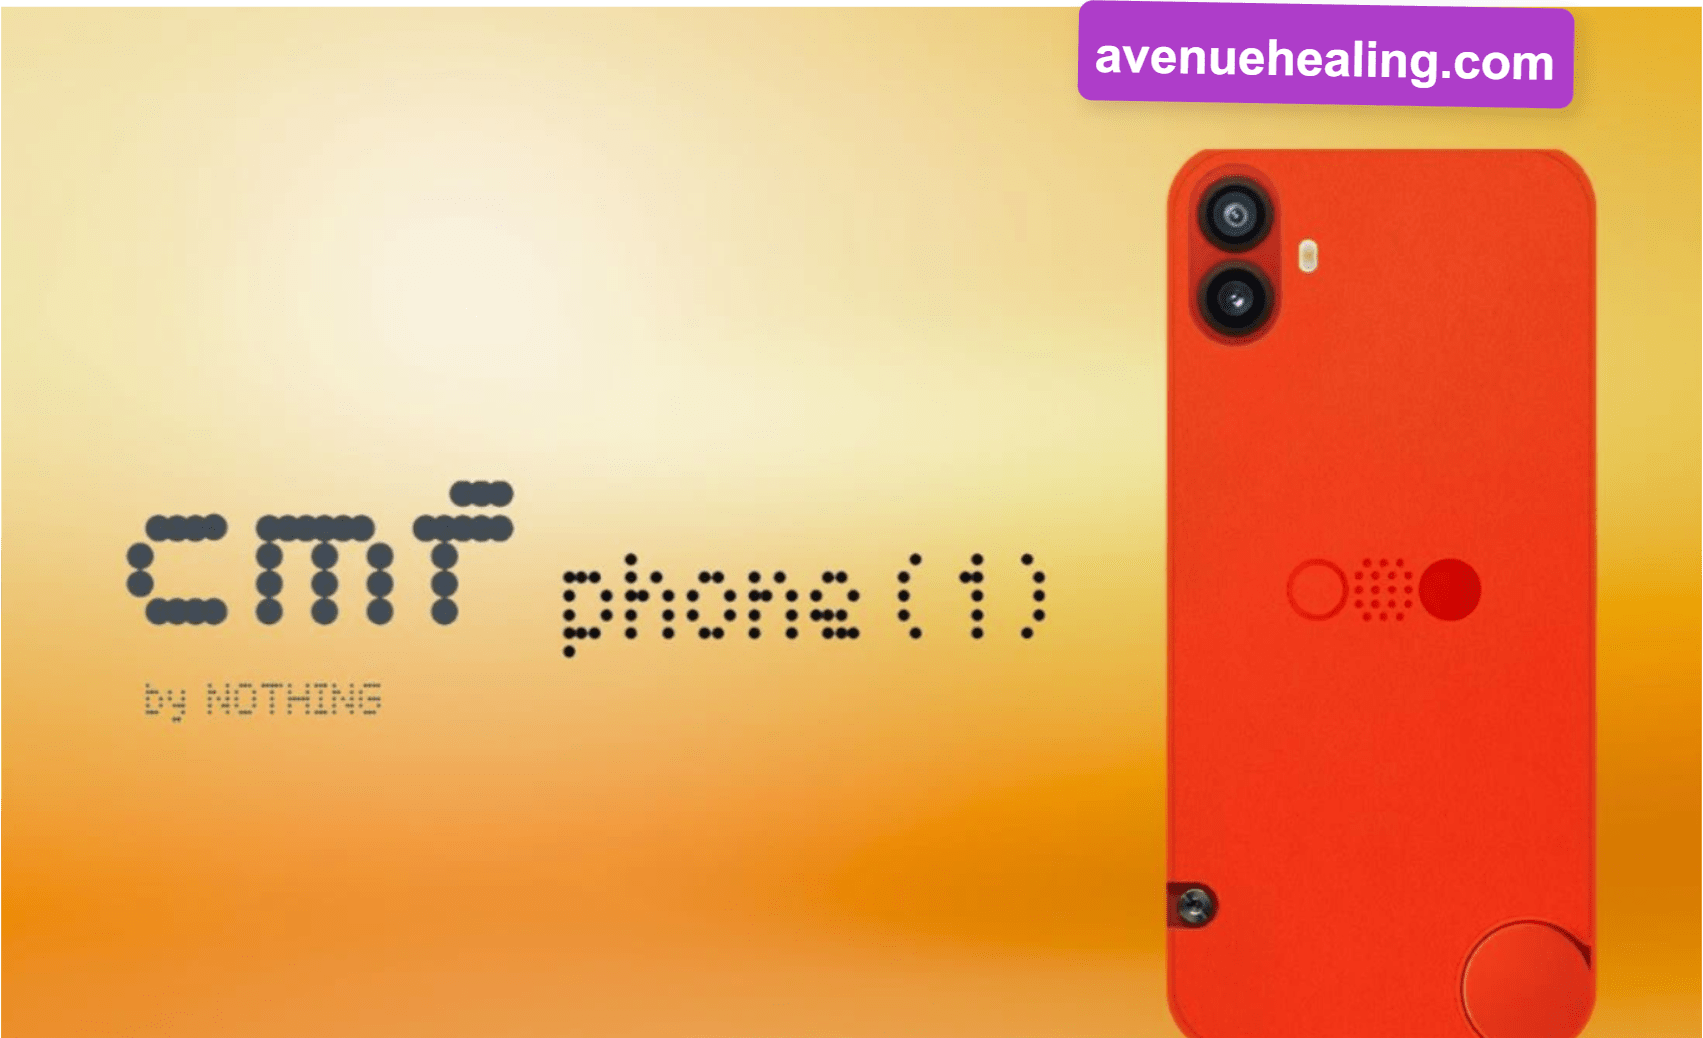 CMF Phone 1 Price and Specs Revealed Ahead of July 8 India Launch: All Details Inside